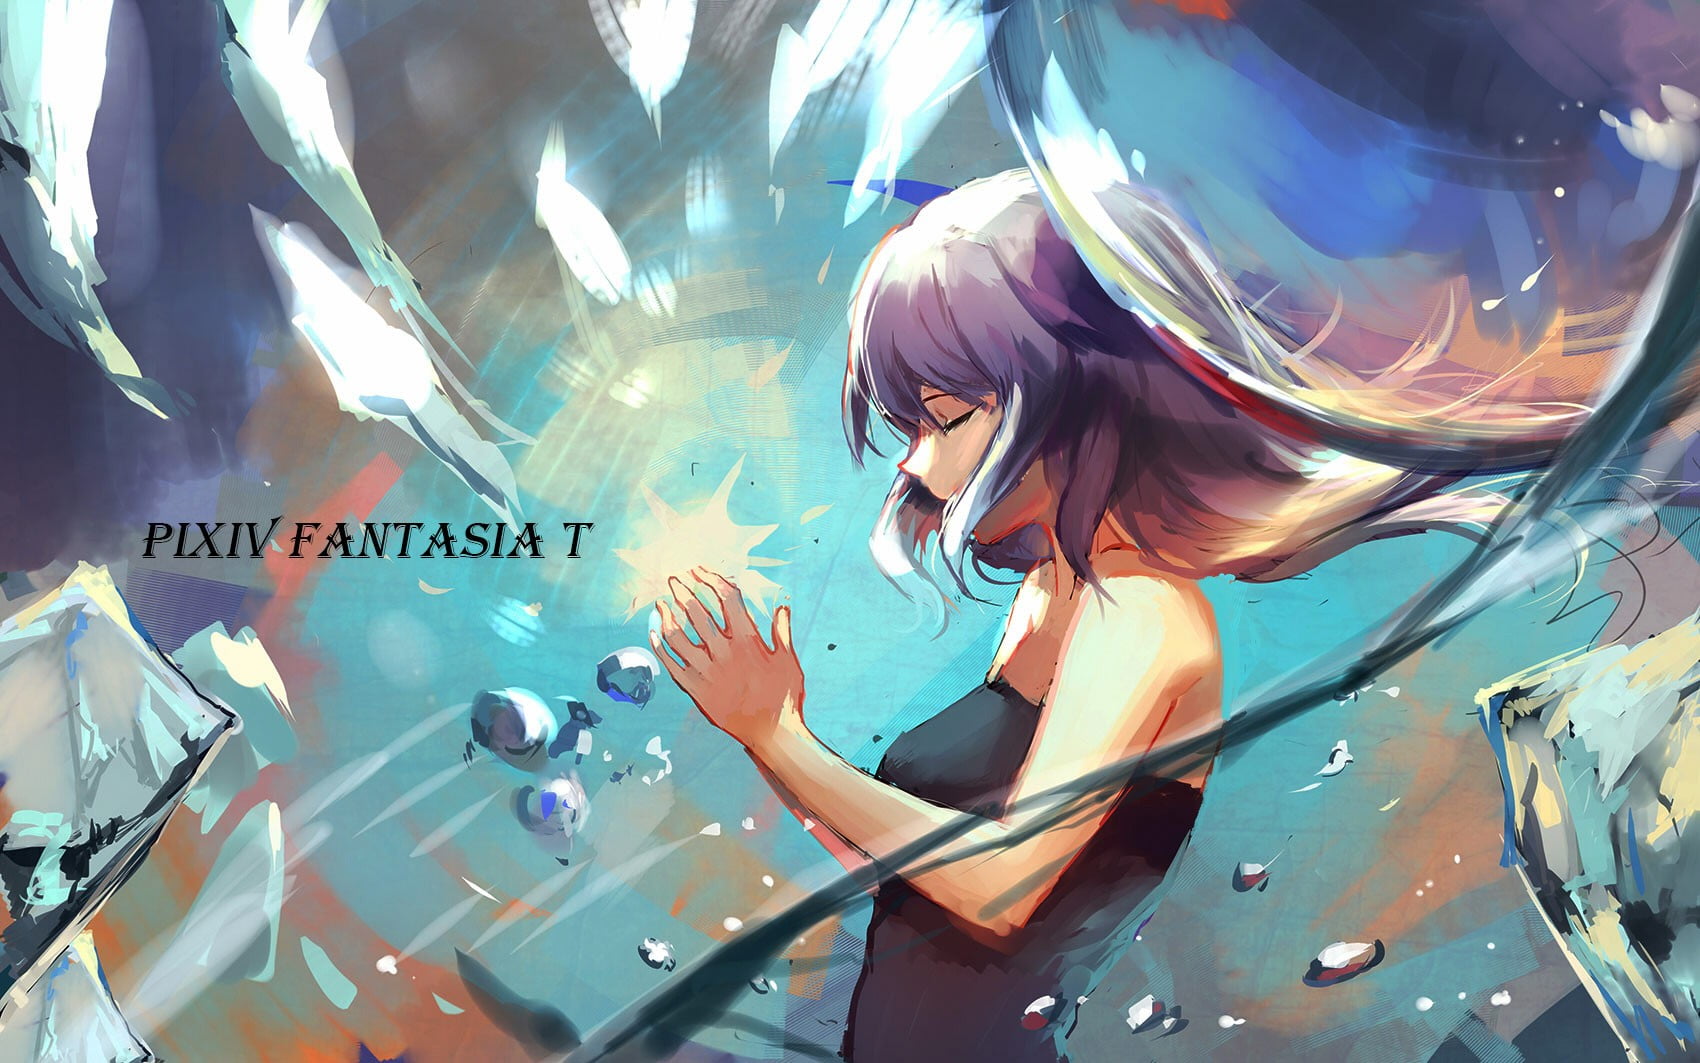 Pixiv Fantasia T illustration, real people, women, one person